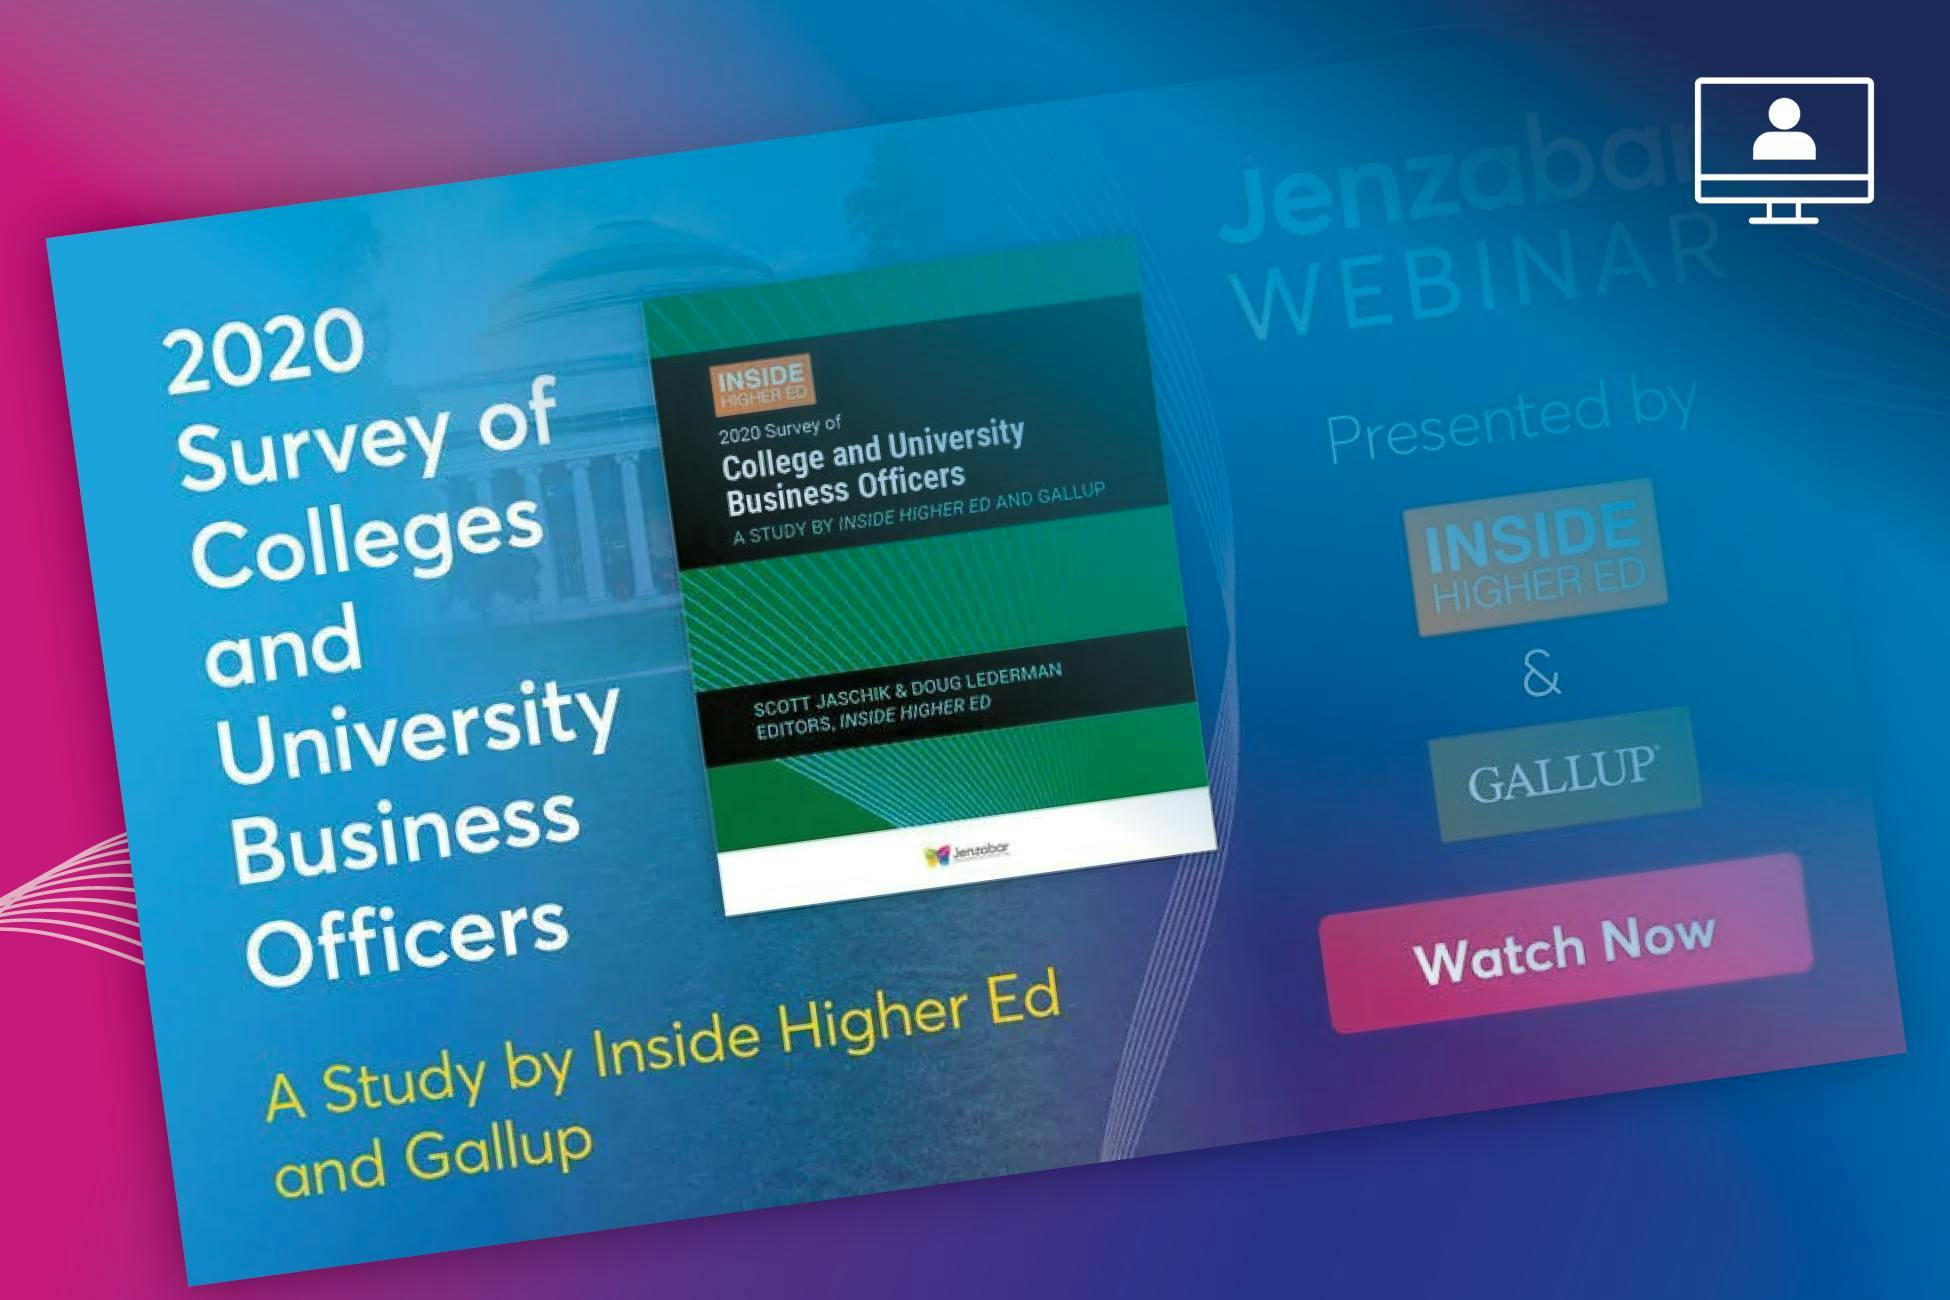 Webinar: 2020 Survey of College and University Business Officers